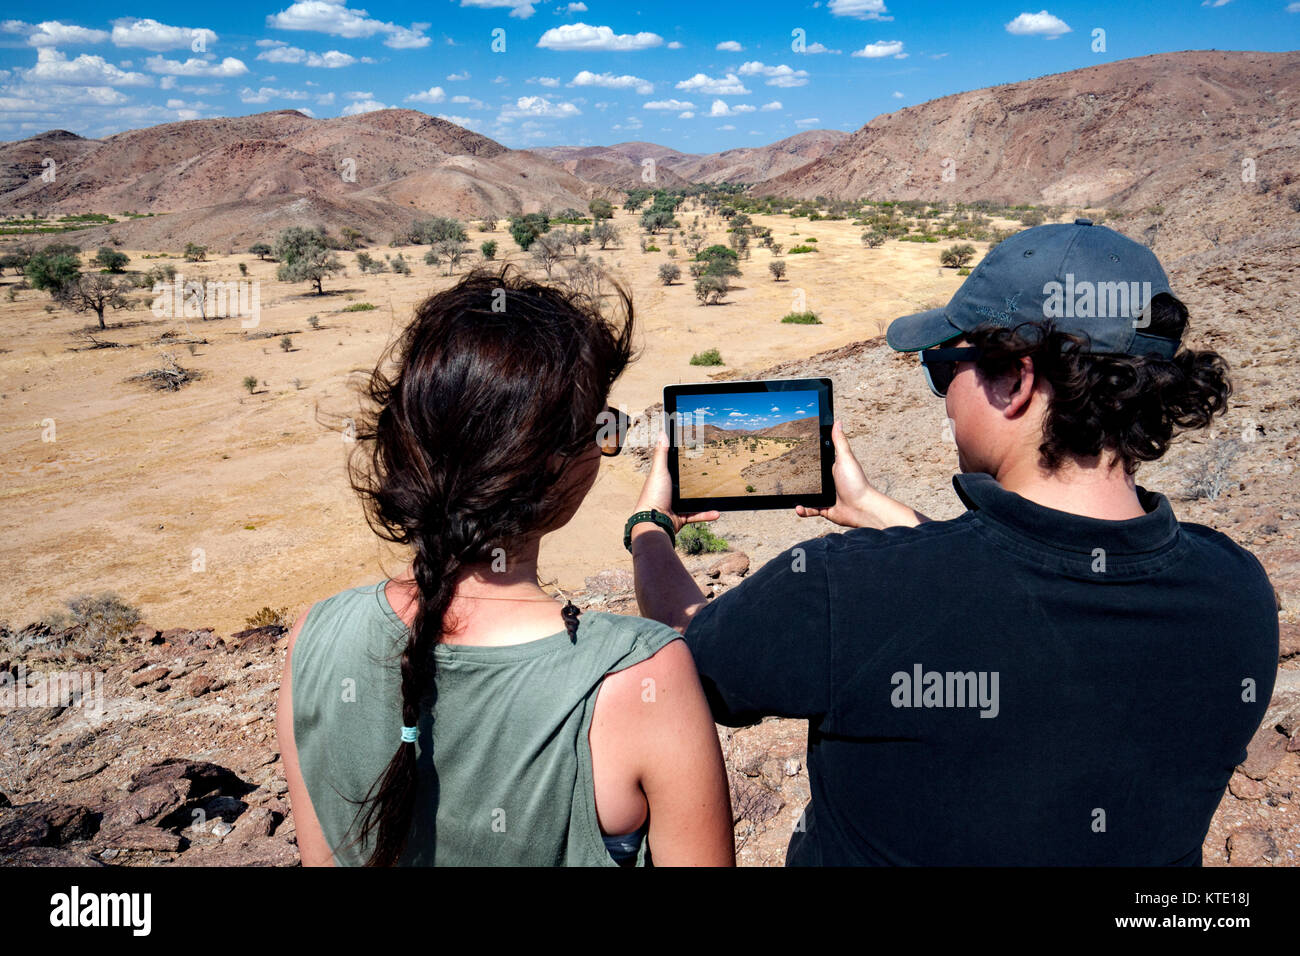 Couple taking picture with tablet in Damaraland - Huab Under Canvas, Damaraland, Namibia, Africa Stock Photo